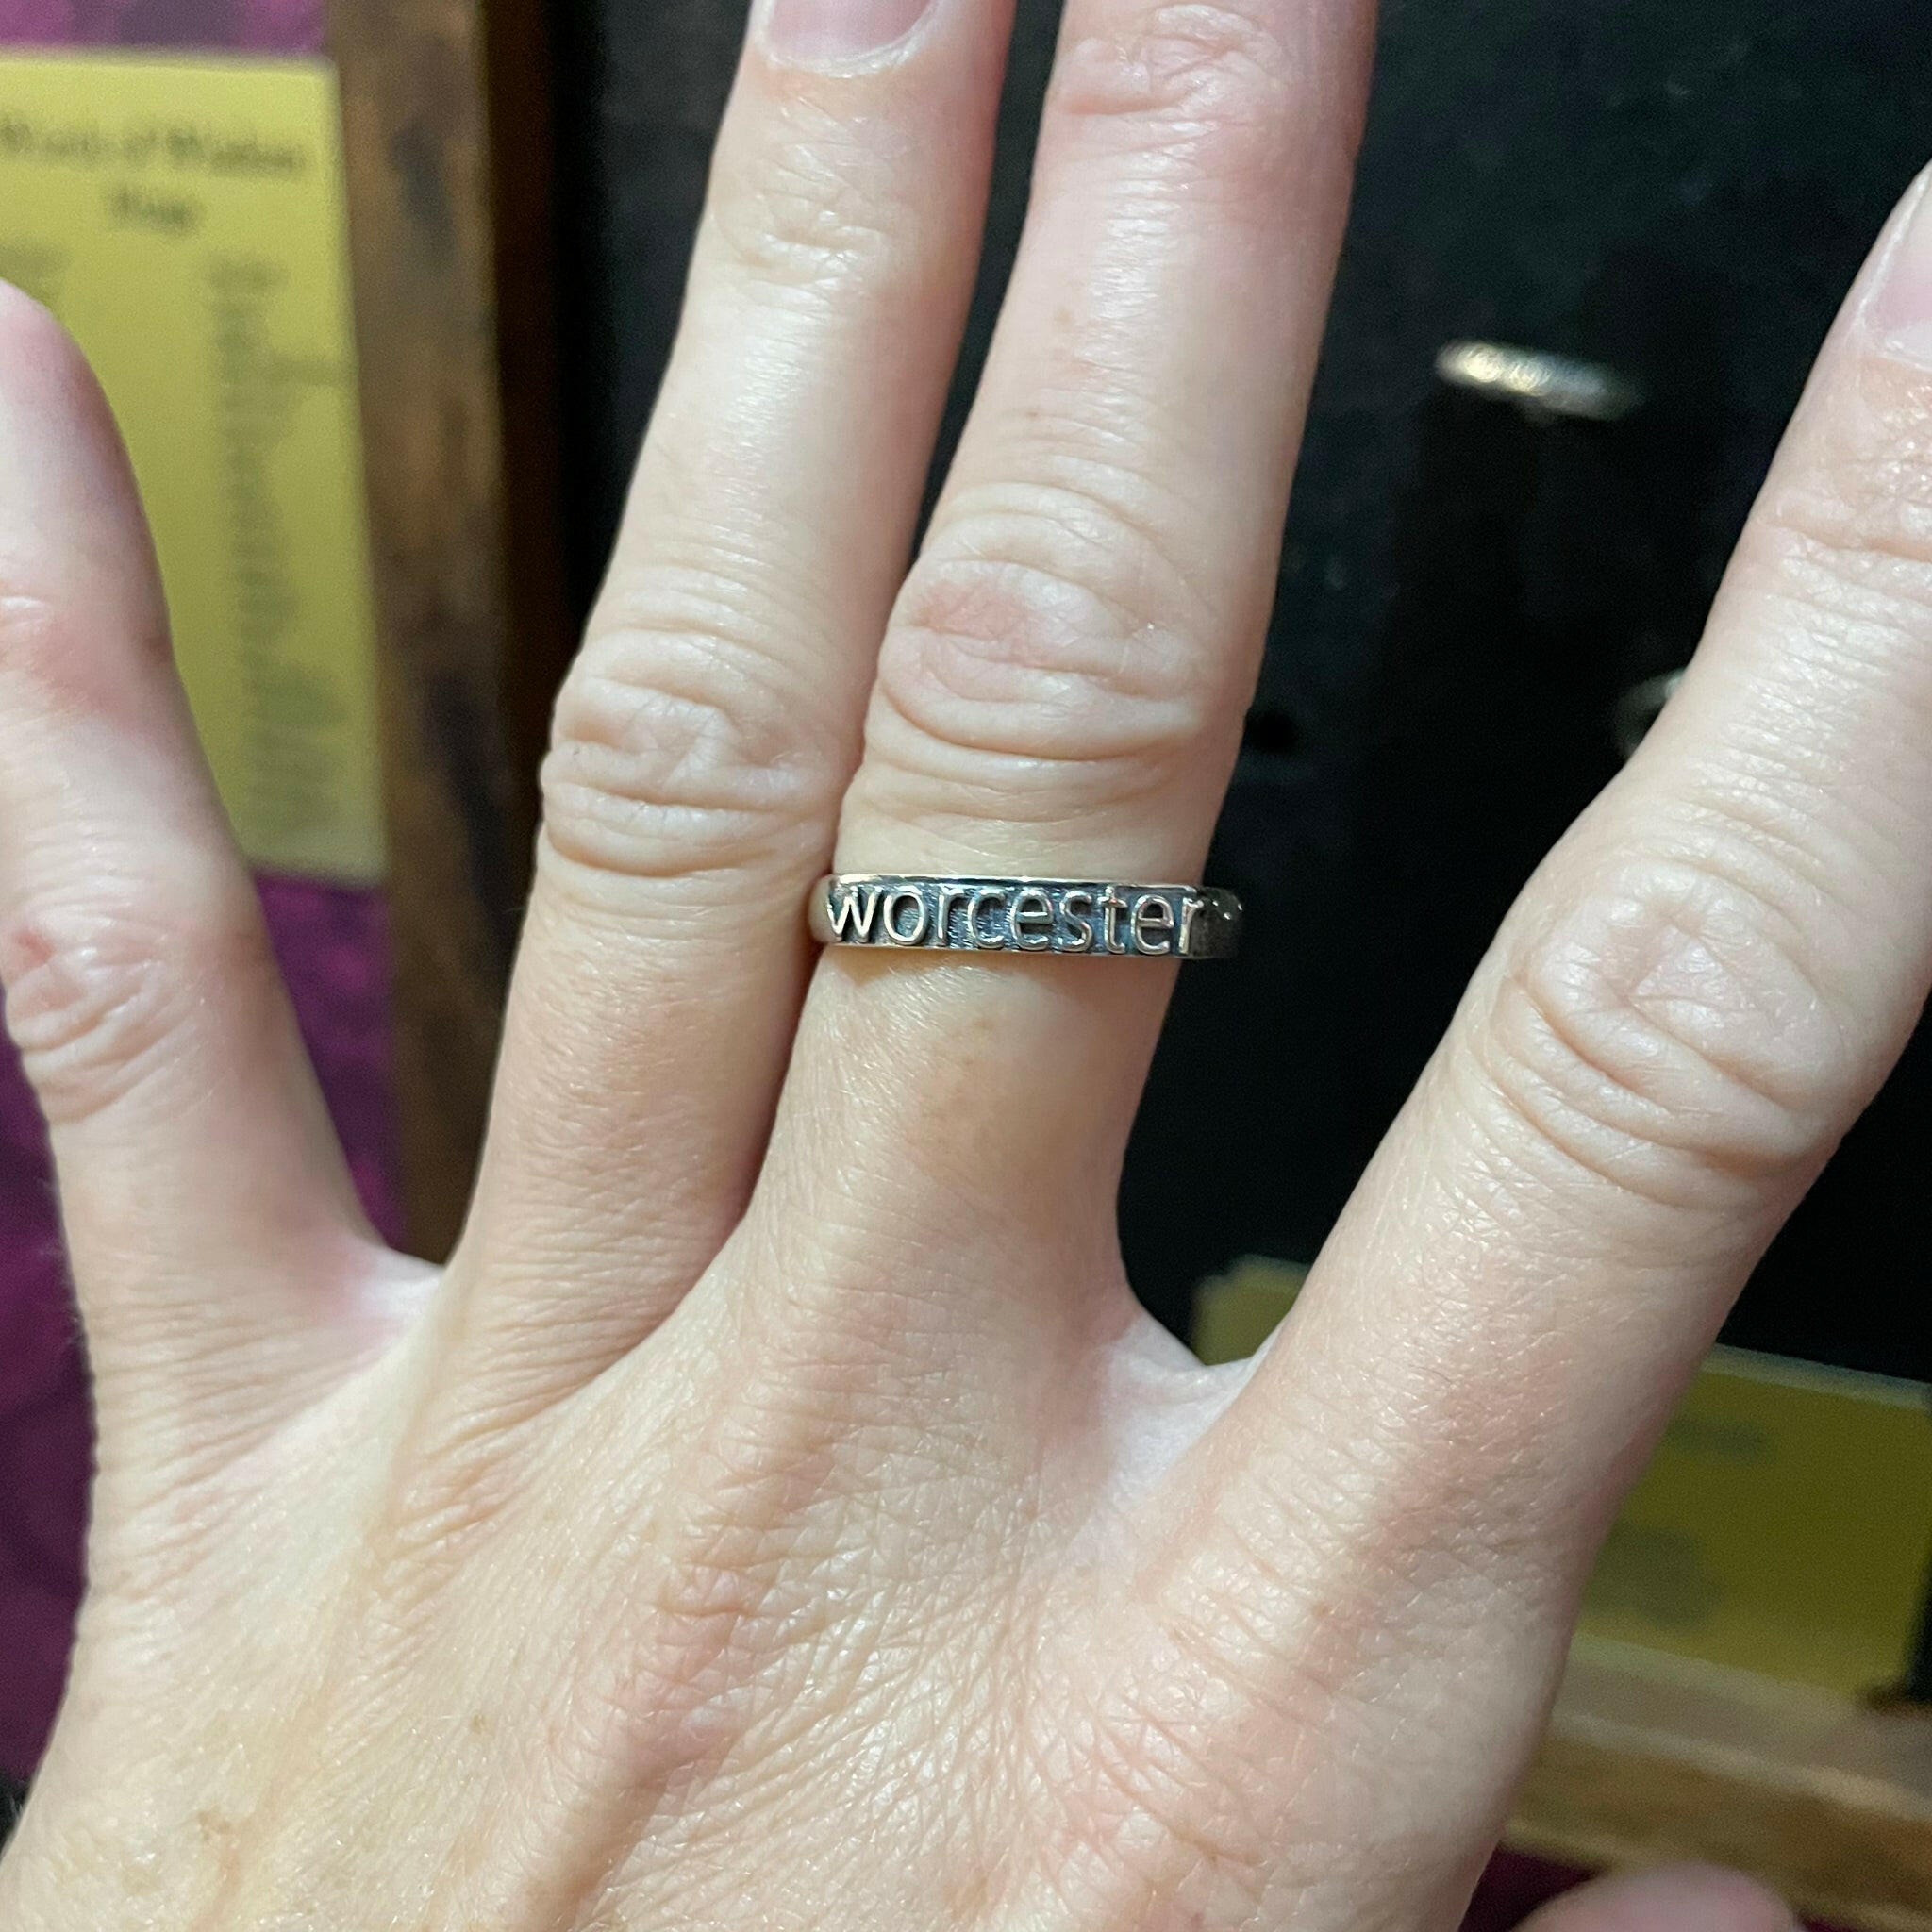 hand wearing a sterling silver ring with text that reads "Worcester"